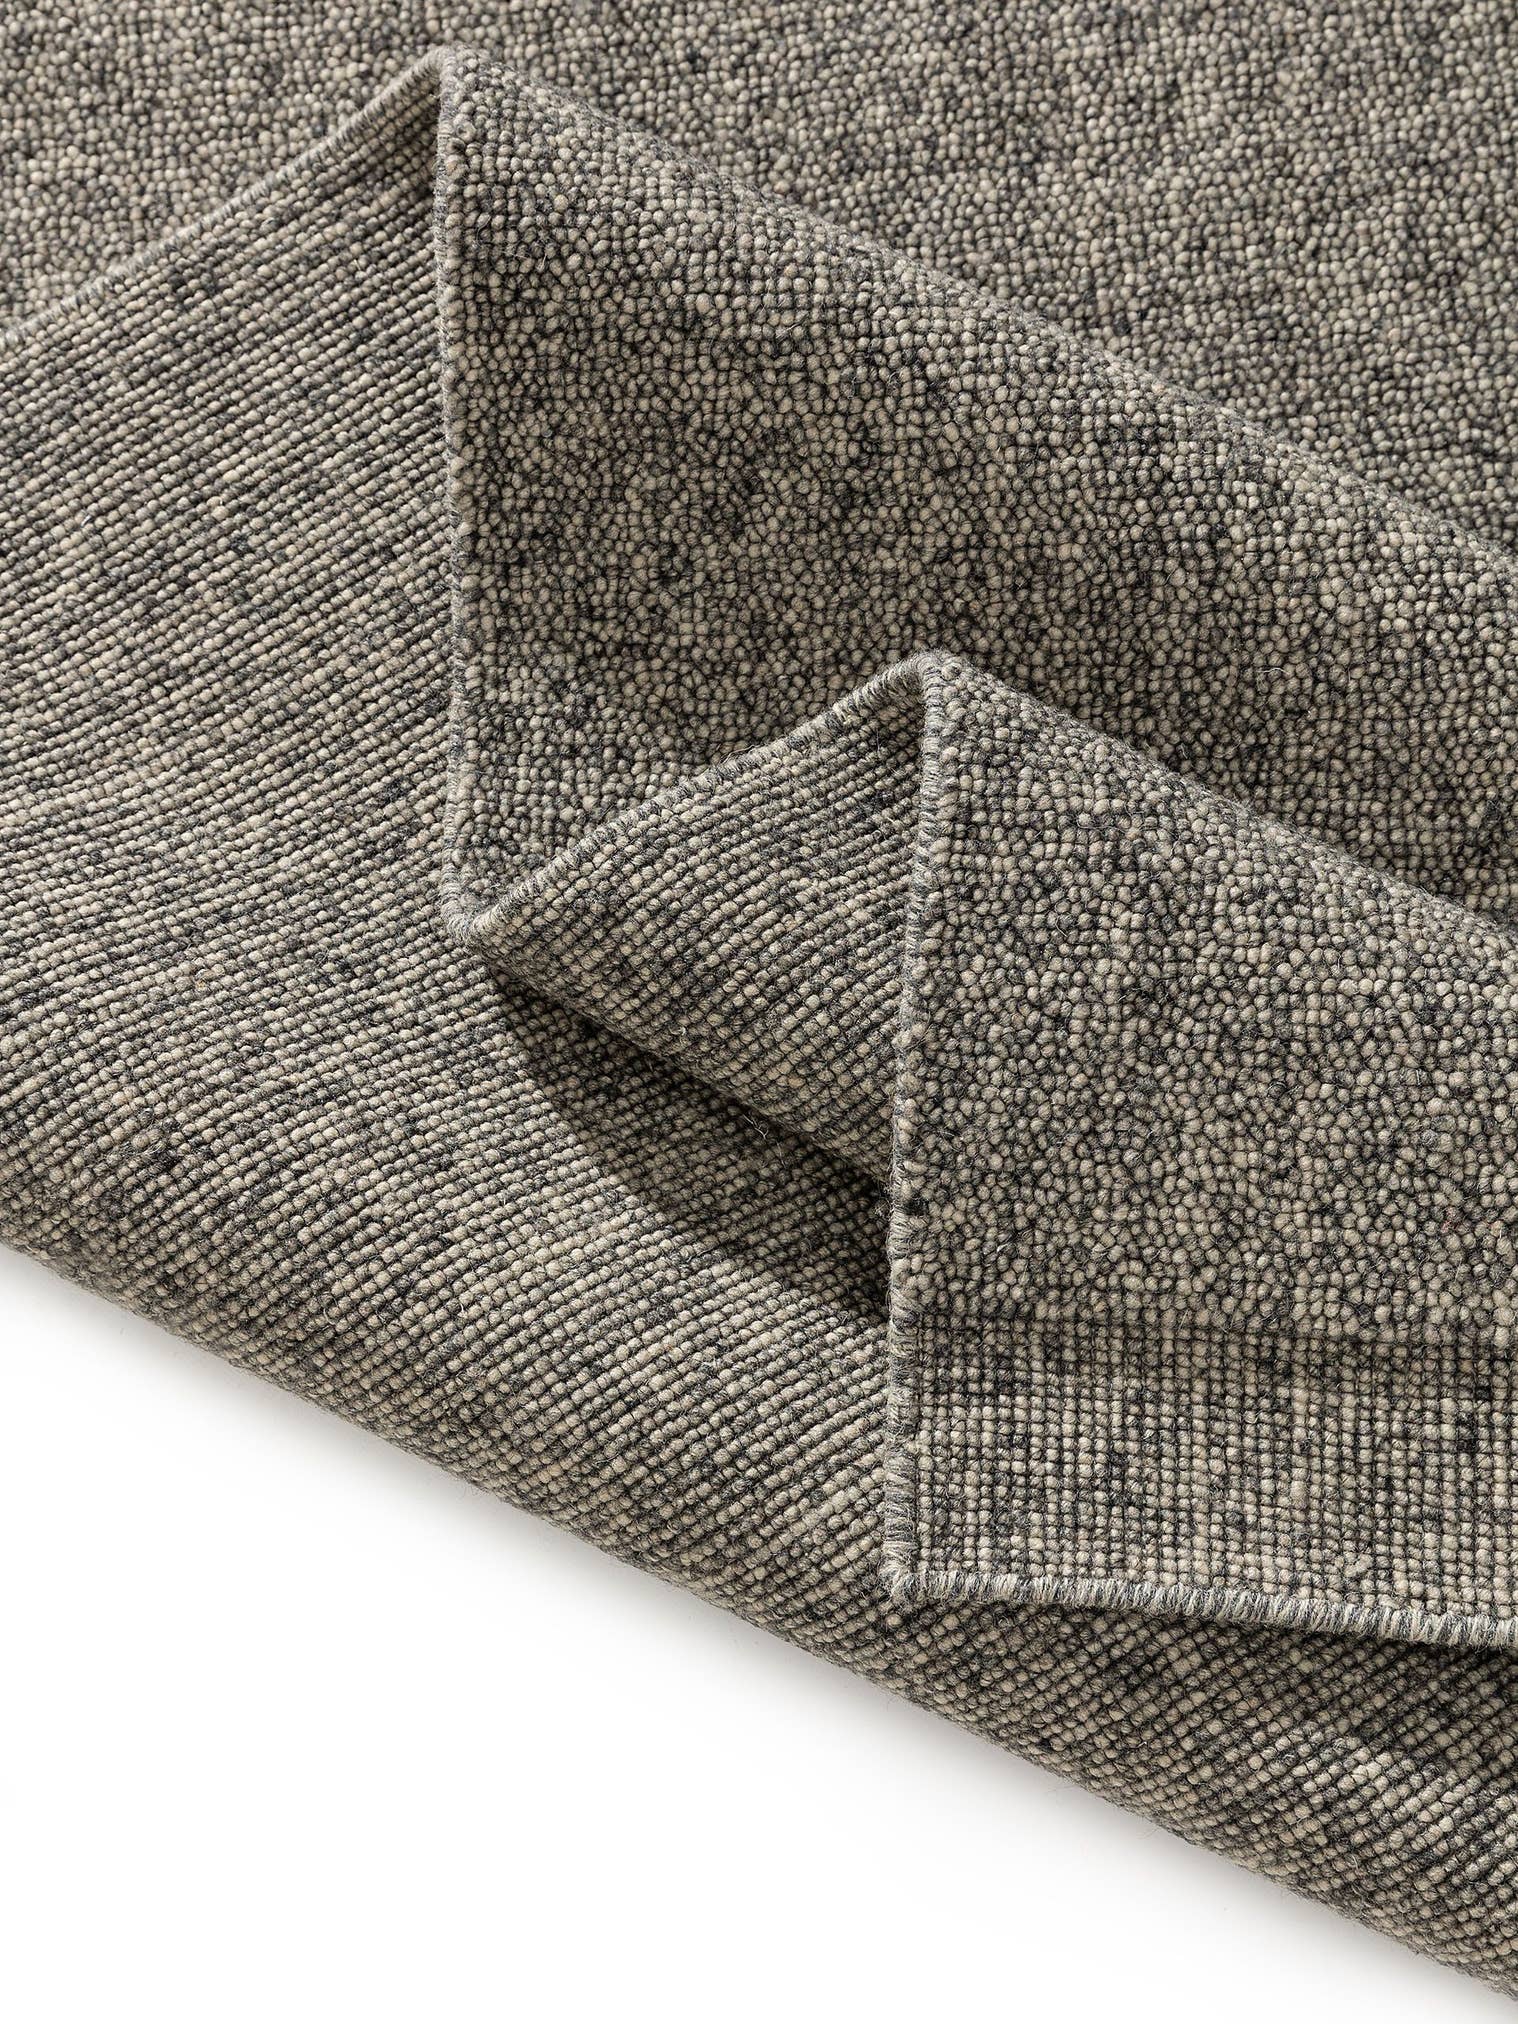 Rug made of 80% wool, 20% cotton in Grey with a 11 - 20 mm high pile by benuta Pure